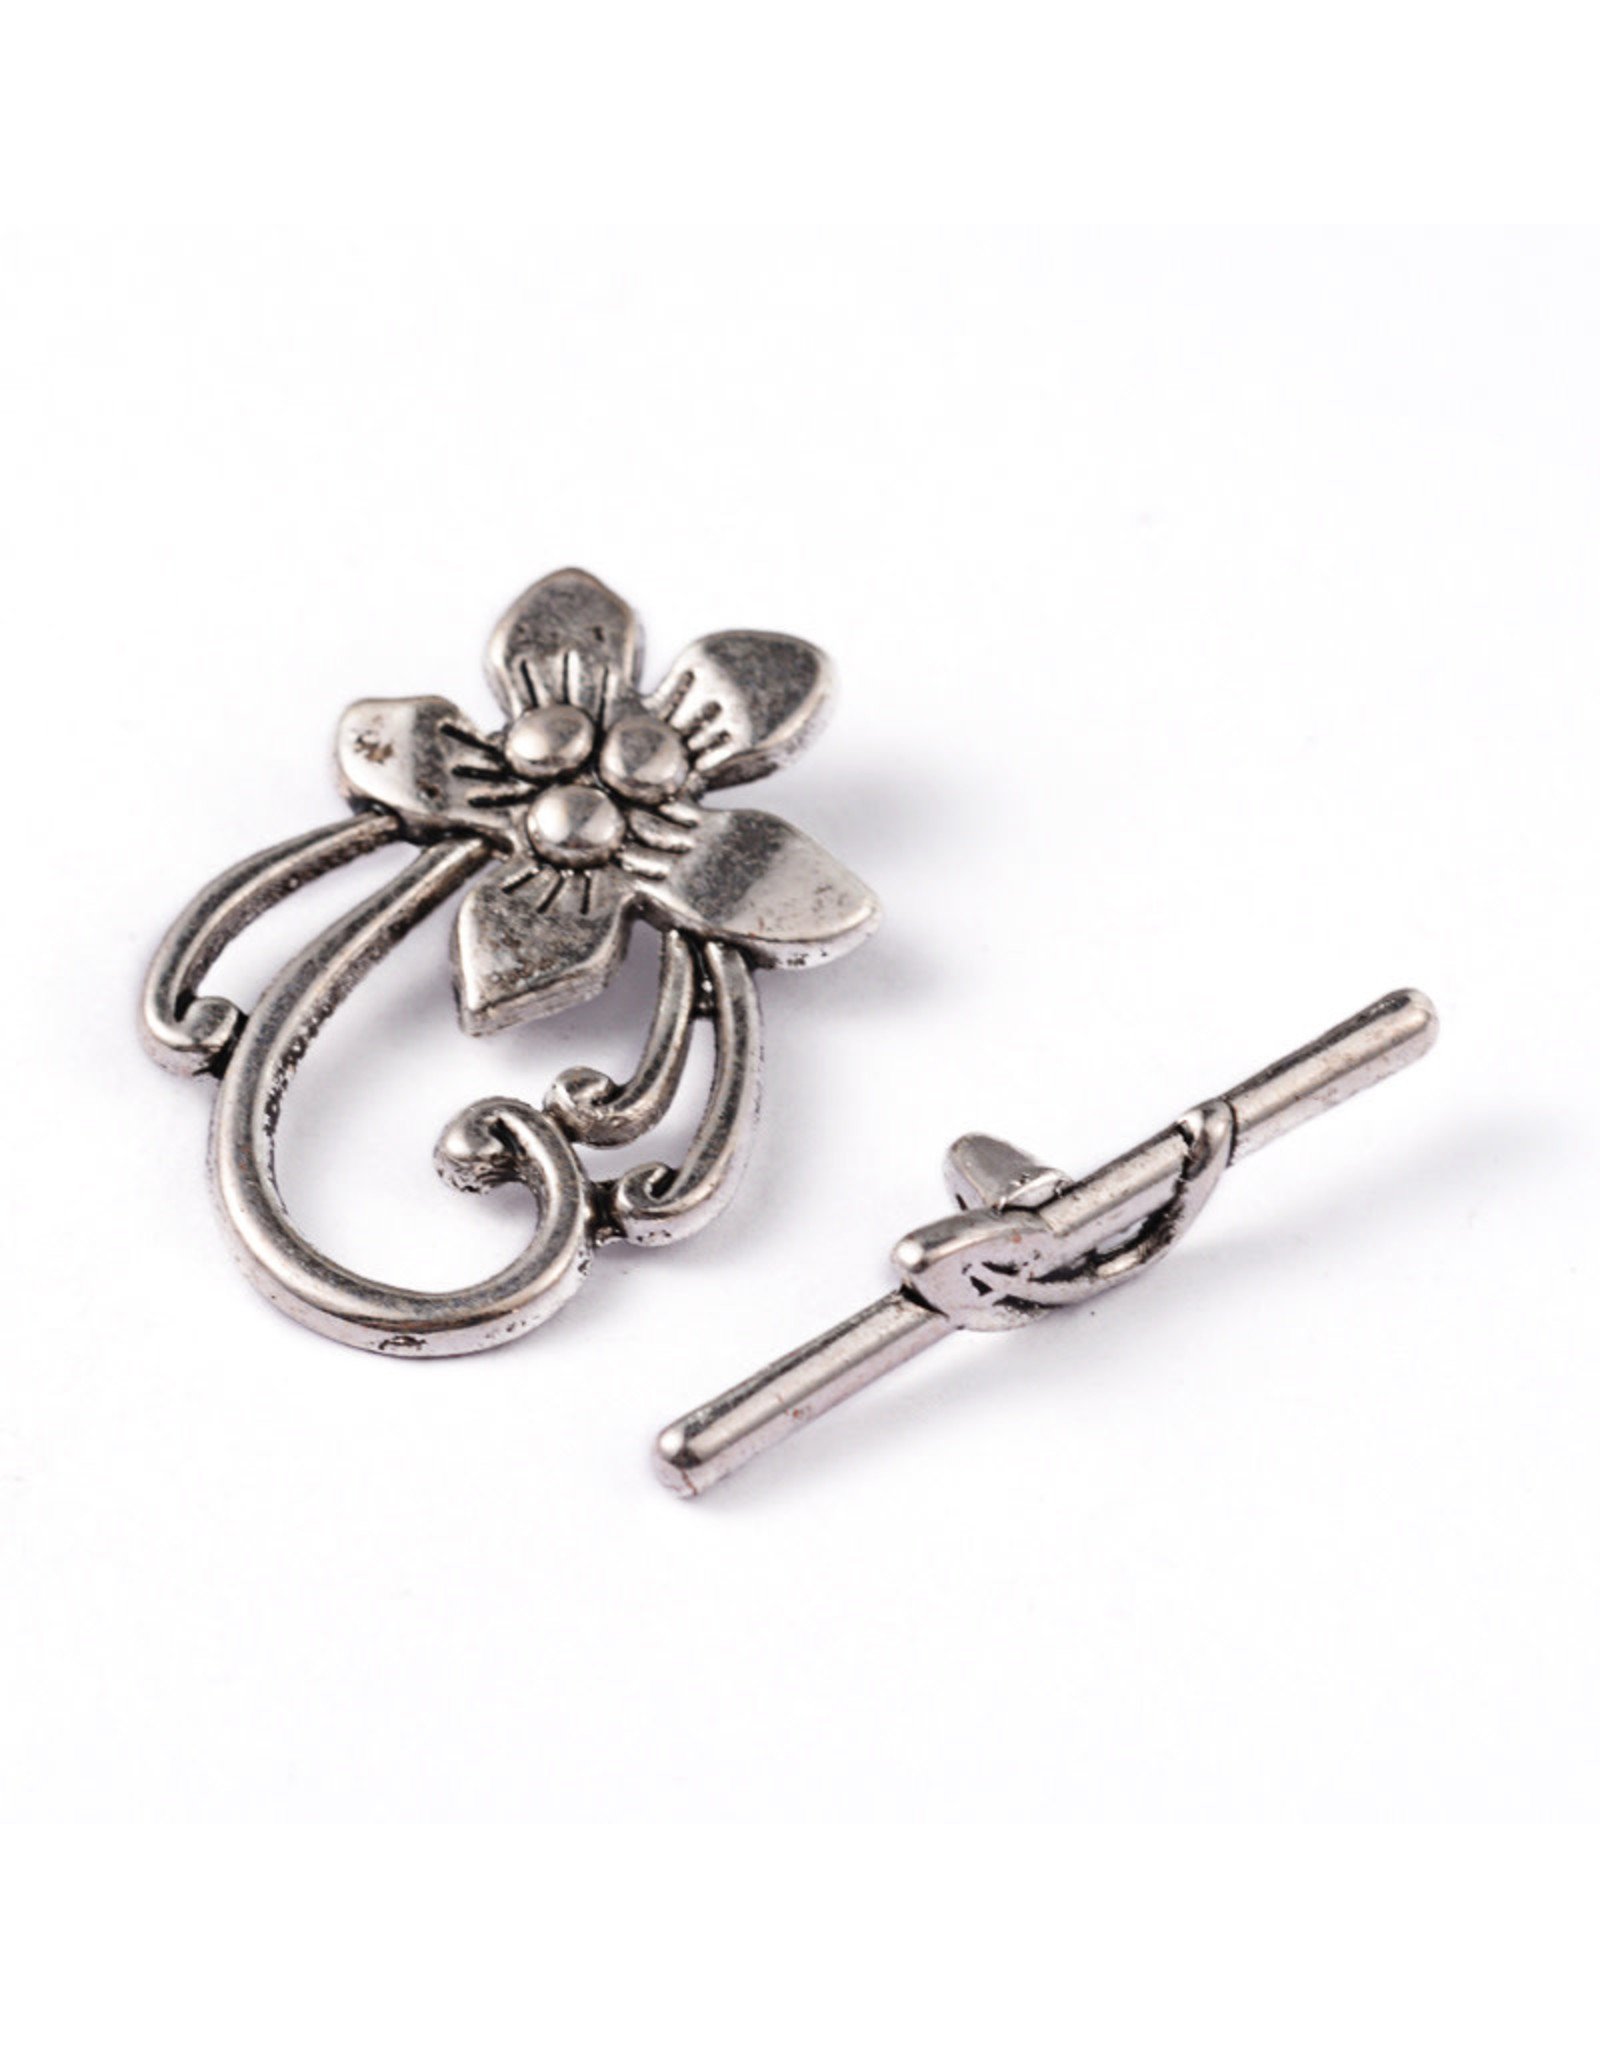 Toggle Clasp Flower 20mm Antique Silver  NF  x5